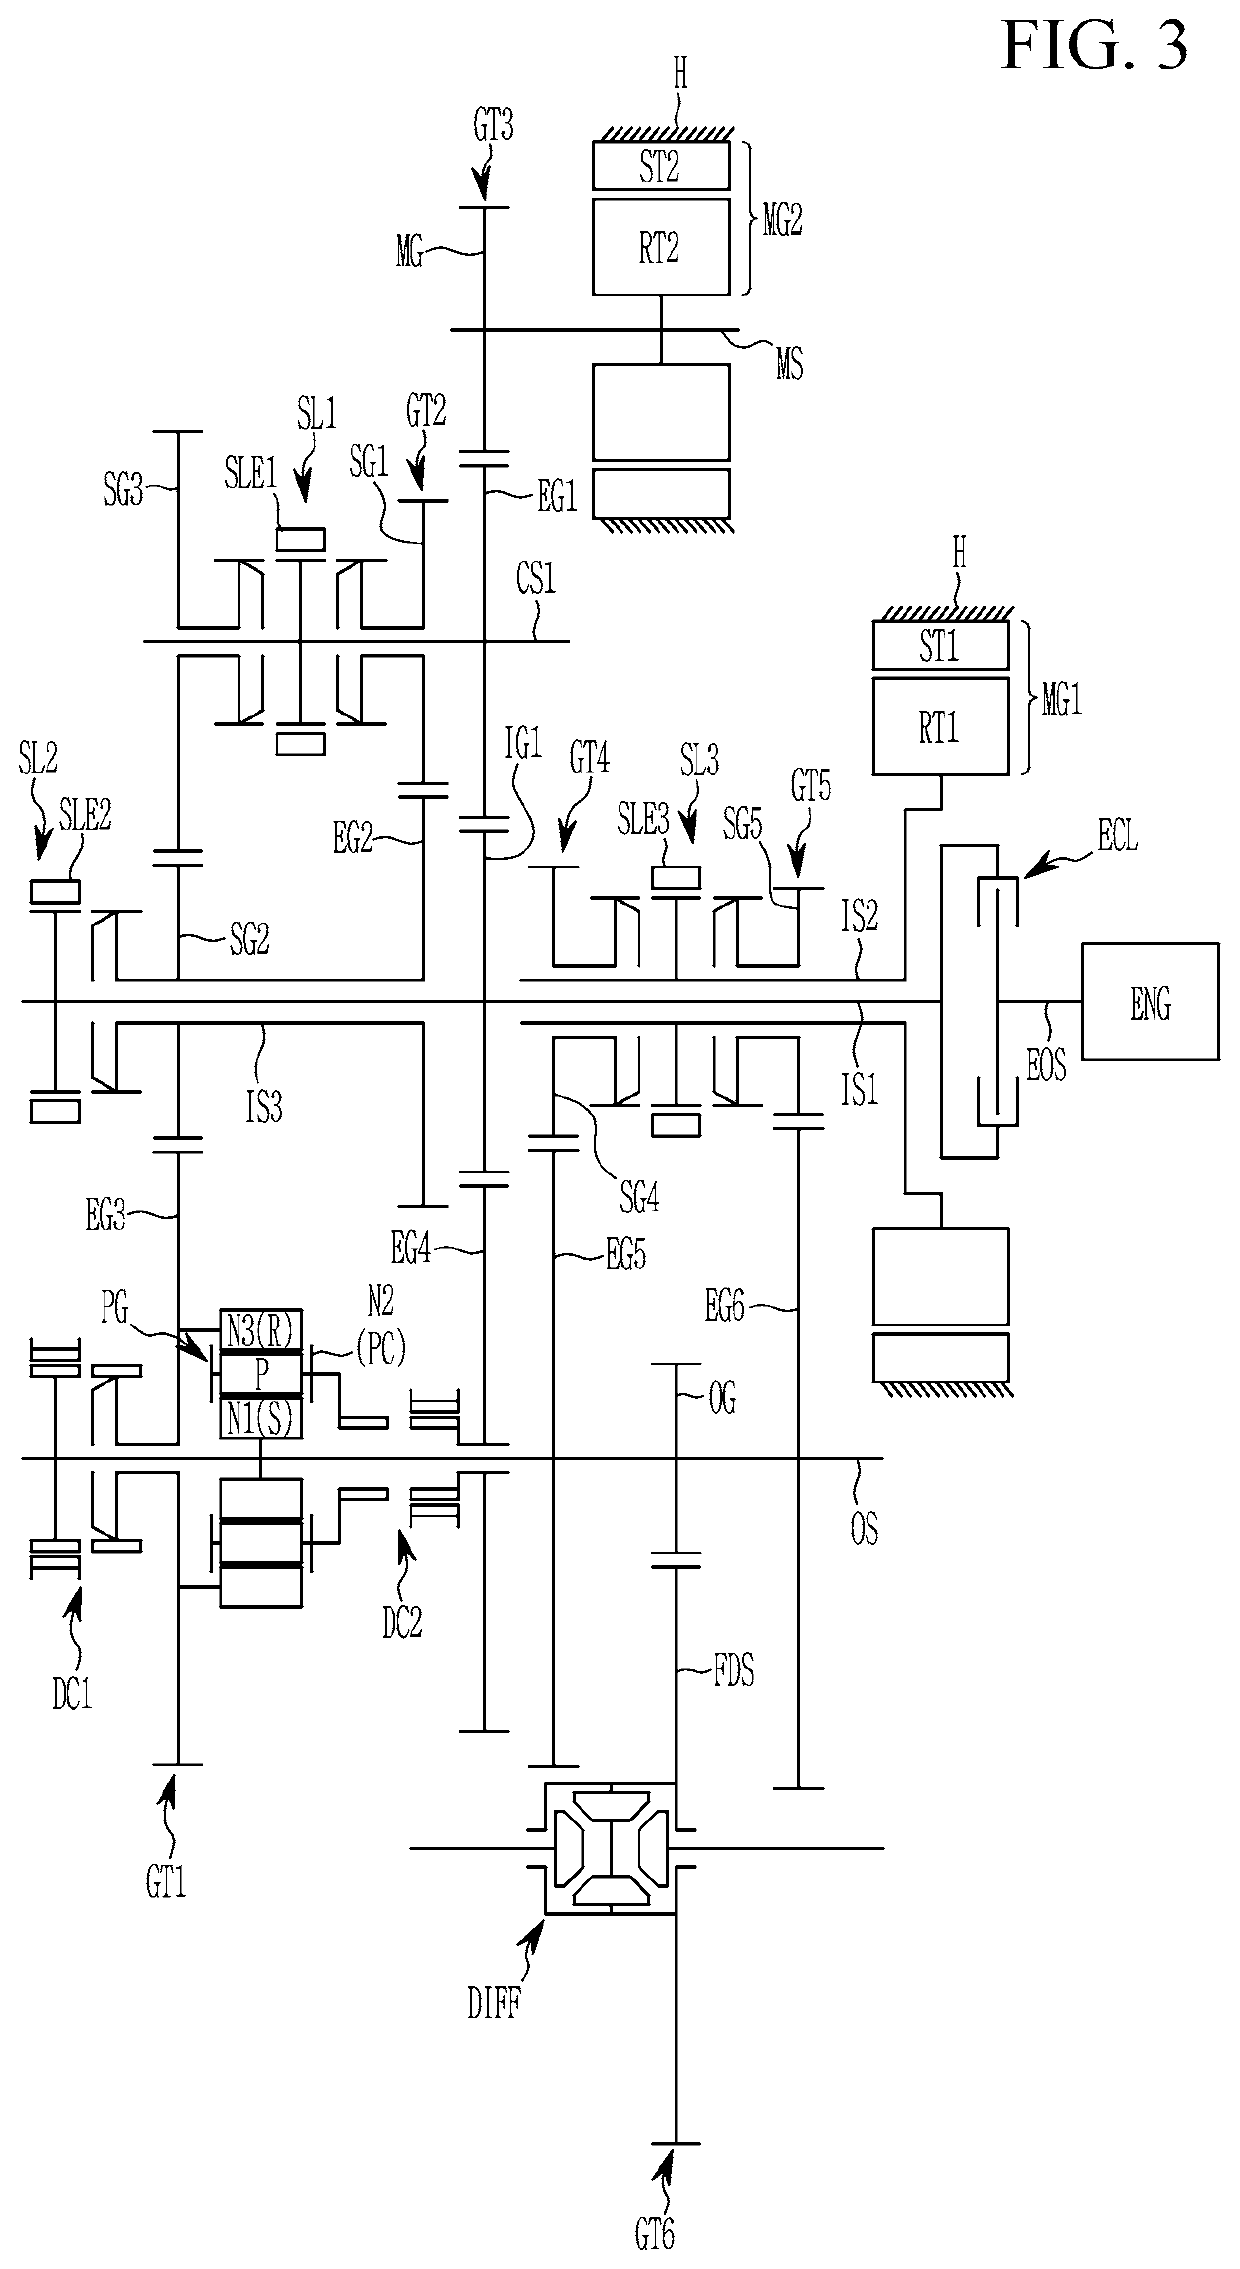 Power transmission system of hybrid electric vehicle